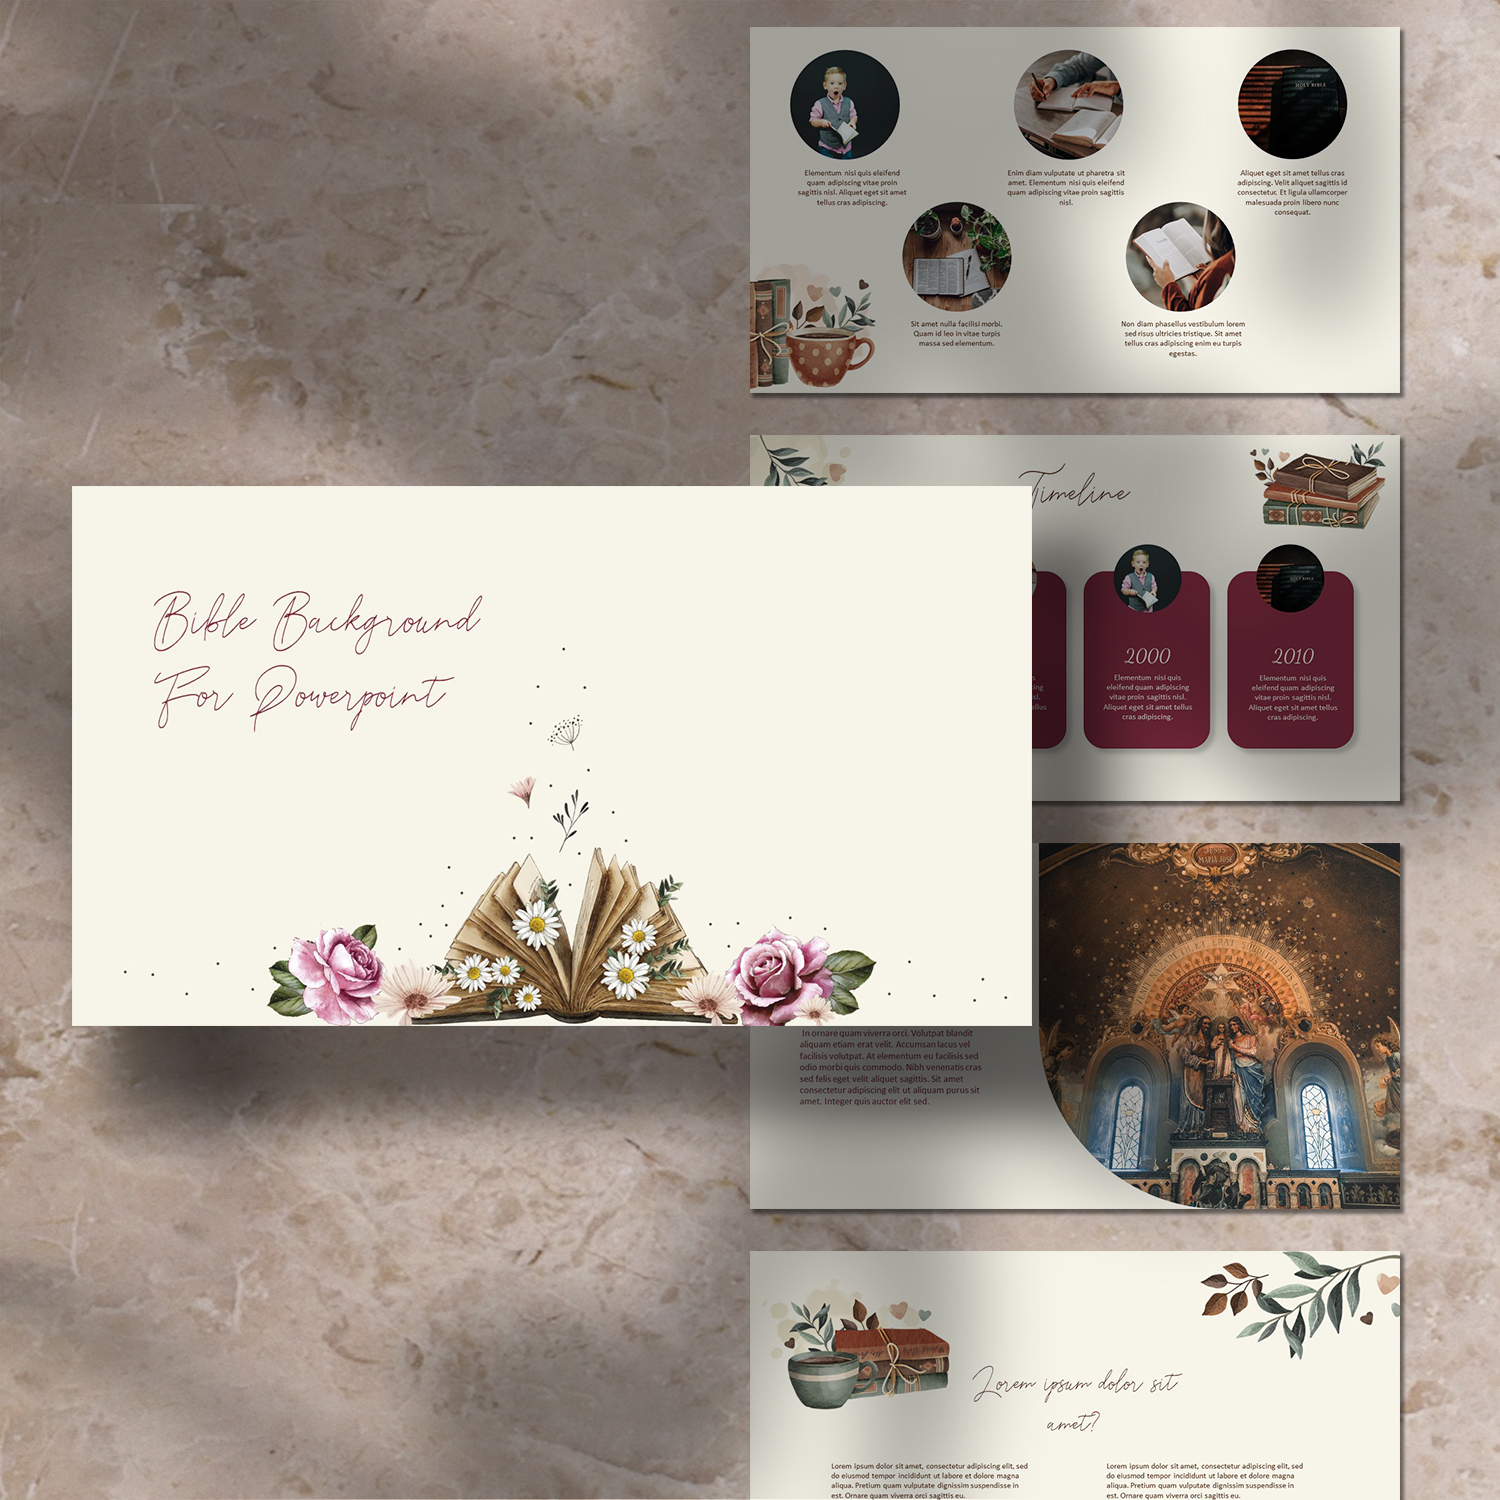 Images illustration of bible background for powerpoint.